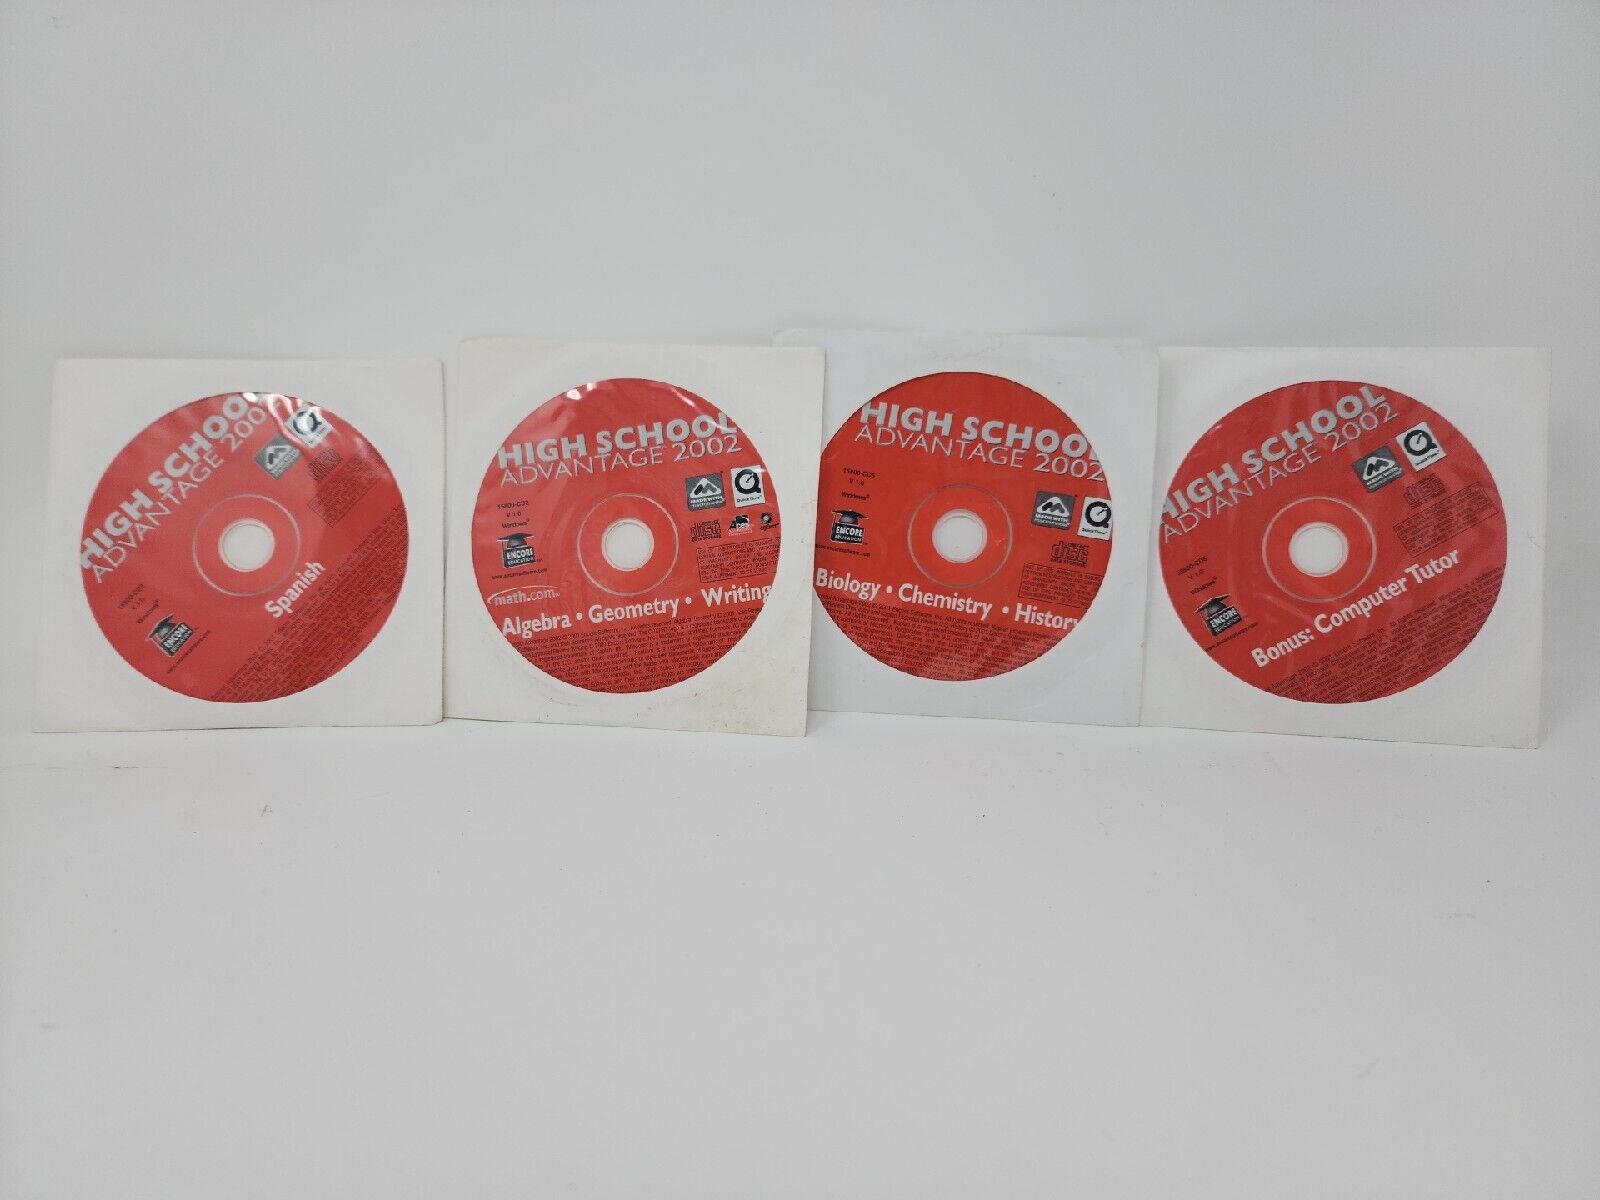 Complete Set LOT OF 5 CD-R of Highschool Advantage 2002 With Original Jackets